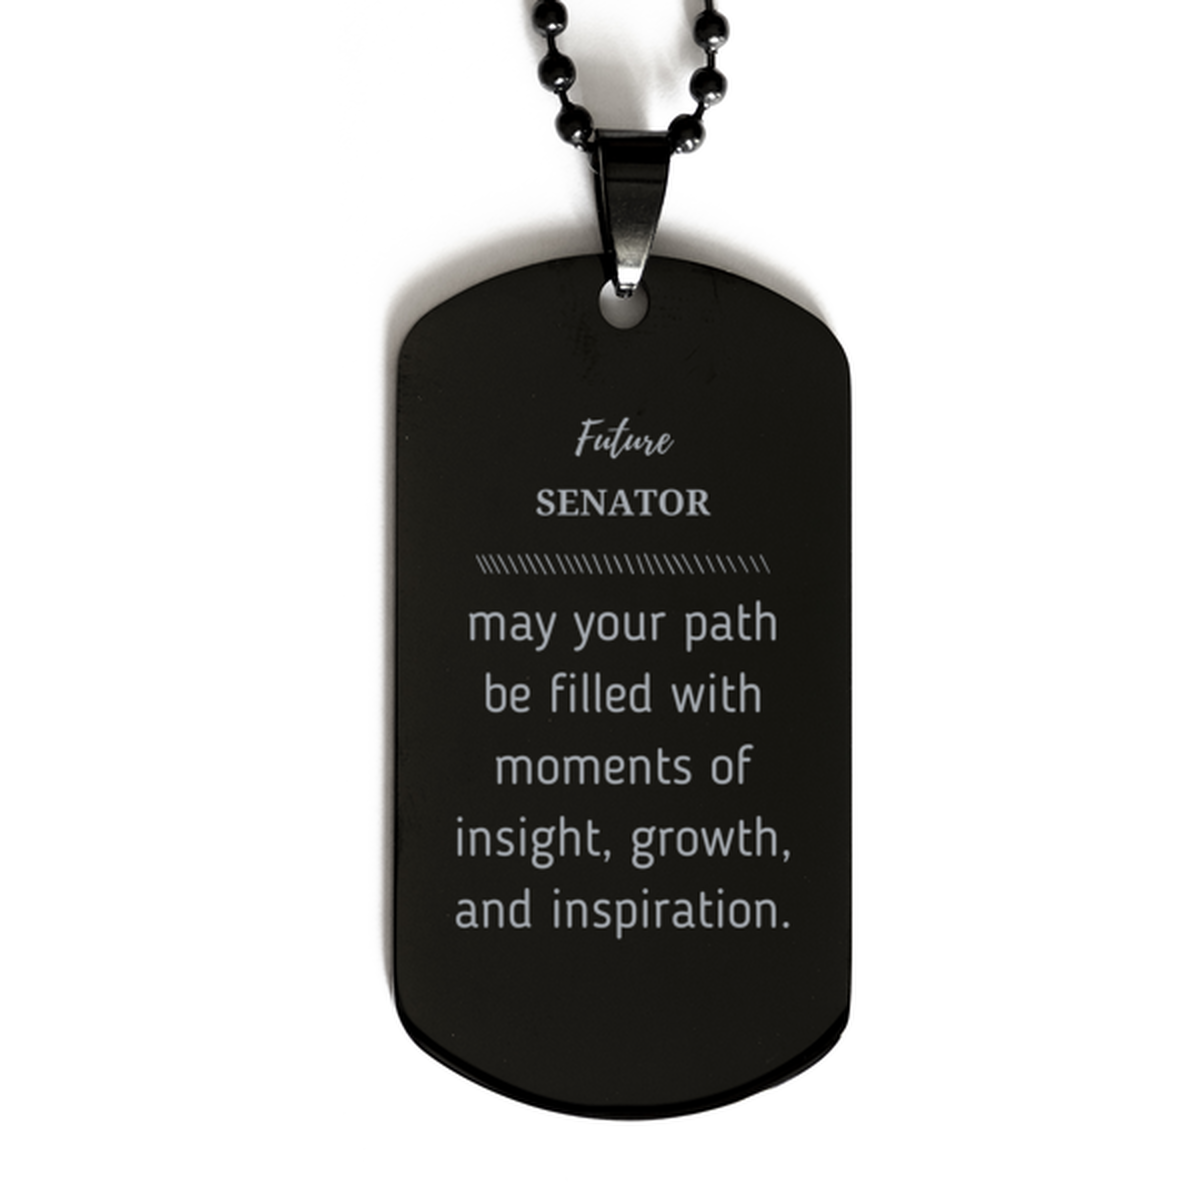 Future Senator Gifts, May your path be filled with moments of insight, Graduation Gifts for New Senator, Christmas Unique Black Dog Tag For Men, Women, Friends